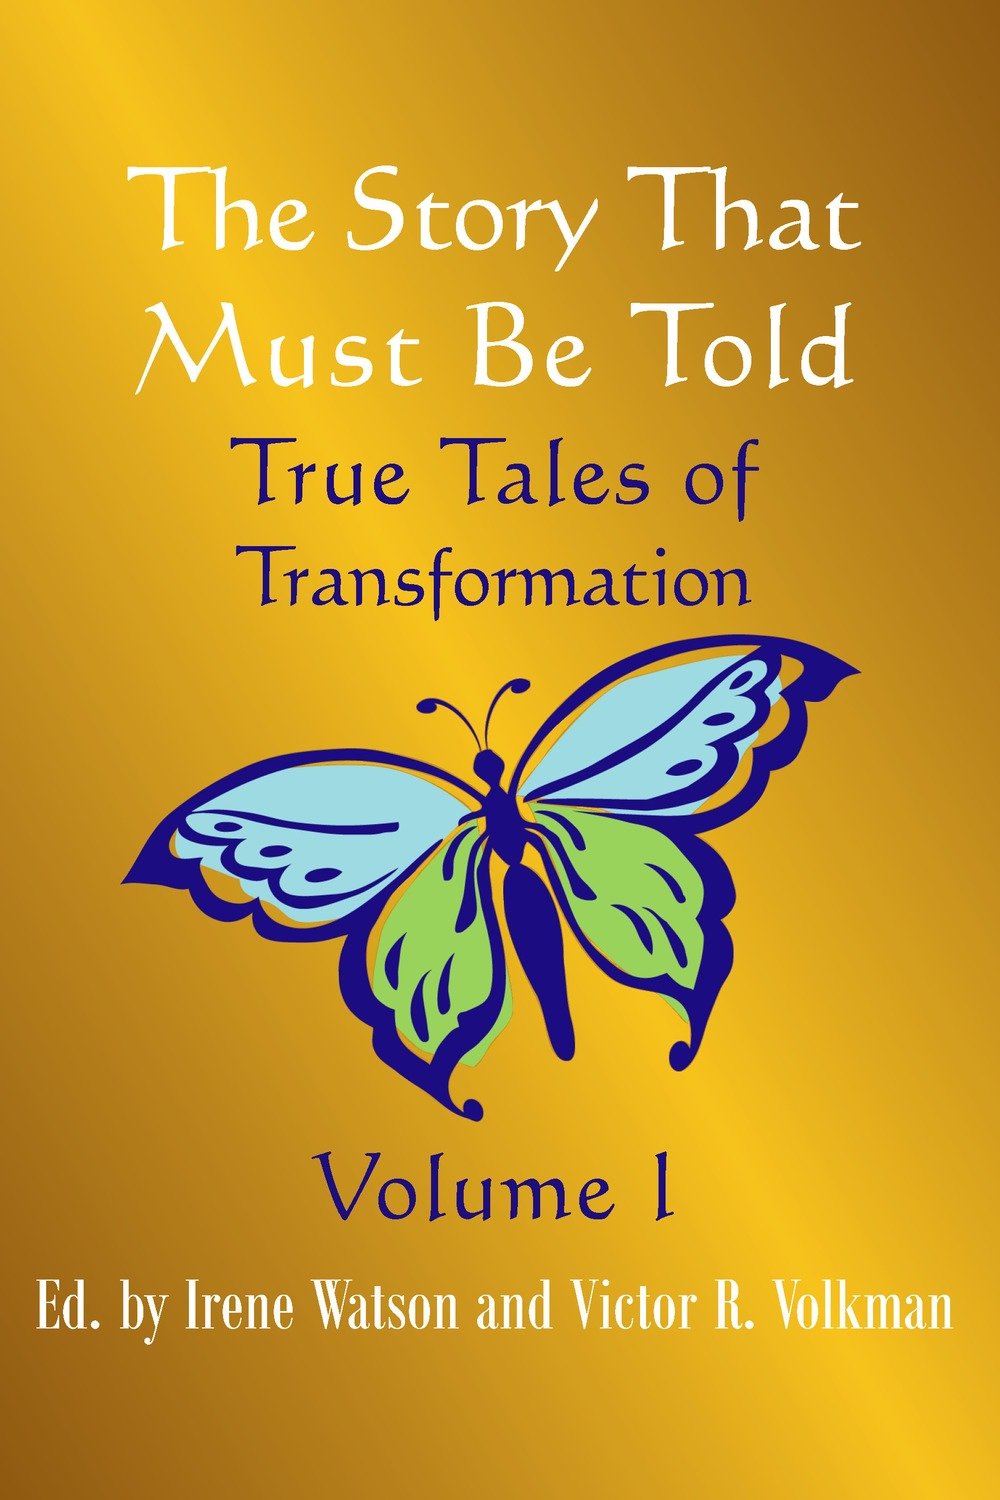 The Story That Must Be Told: True Tales of Transformation